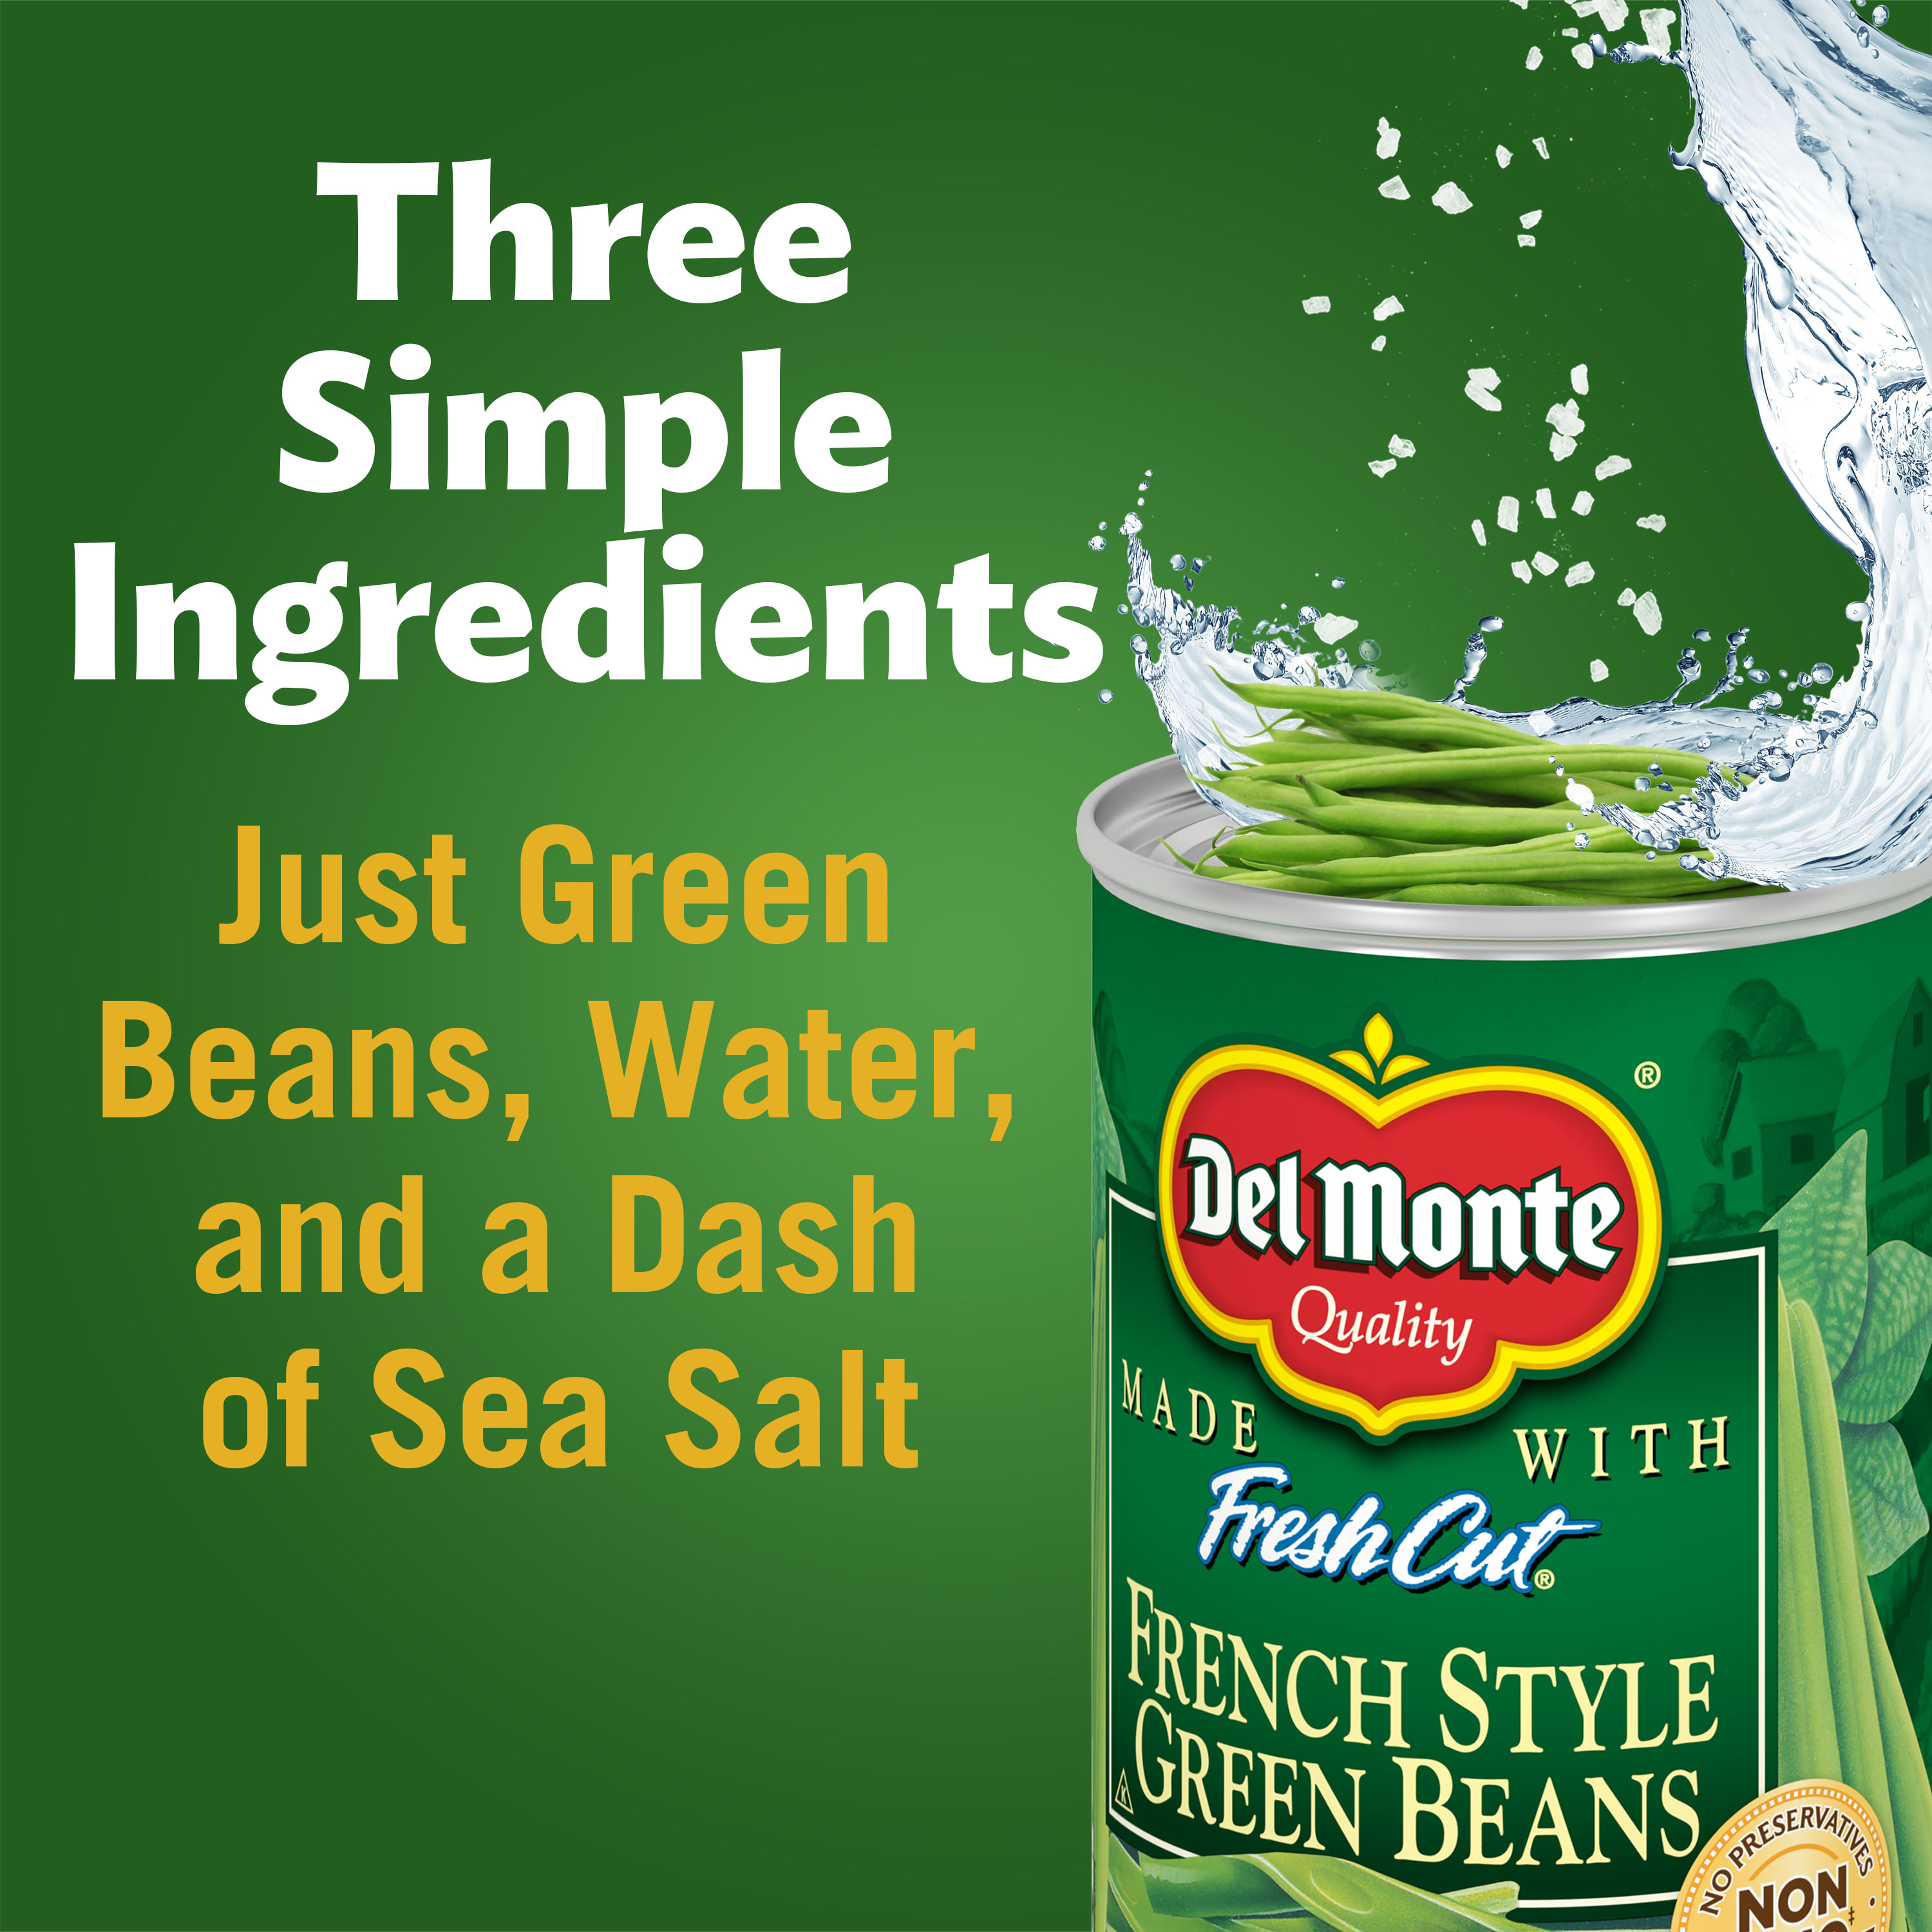 (4 Cans) Del Monte French Style Green Beans, 14.5 oz Can - image 5 of 7